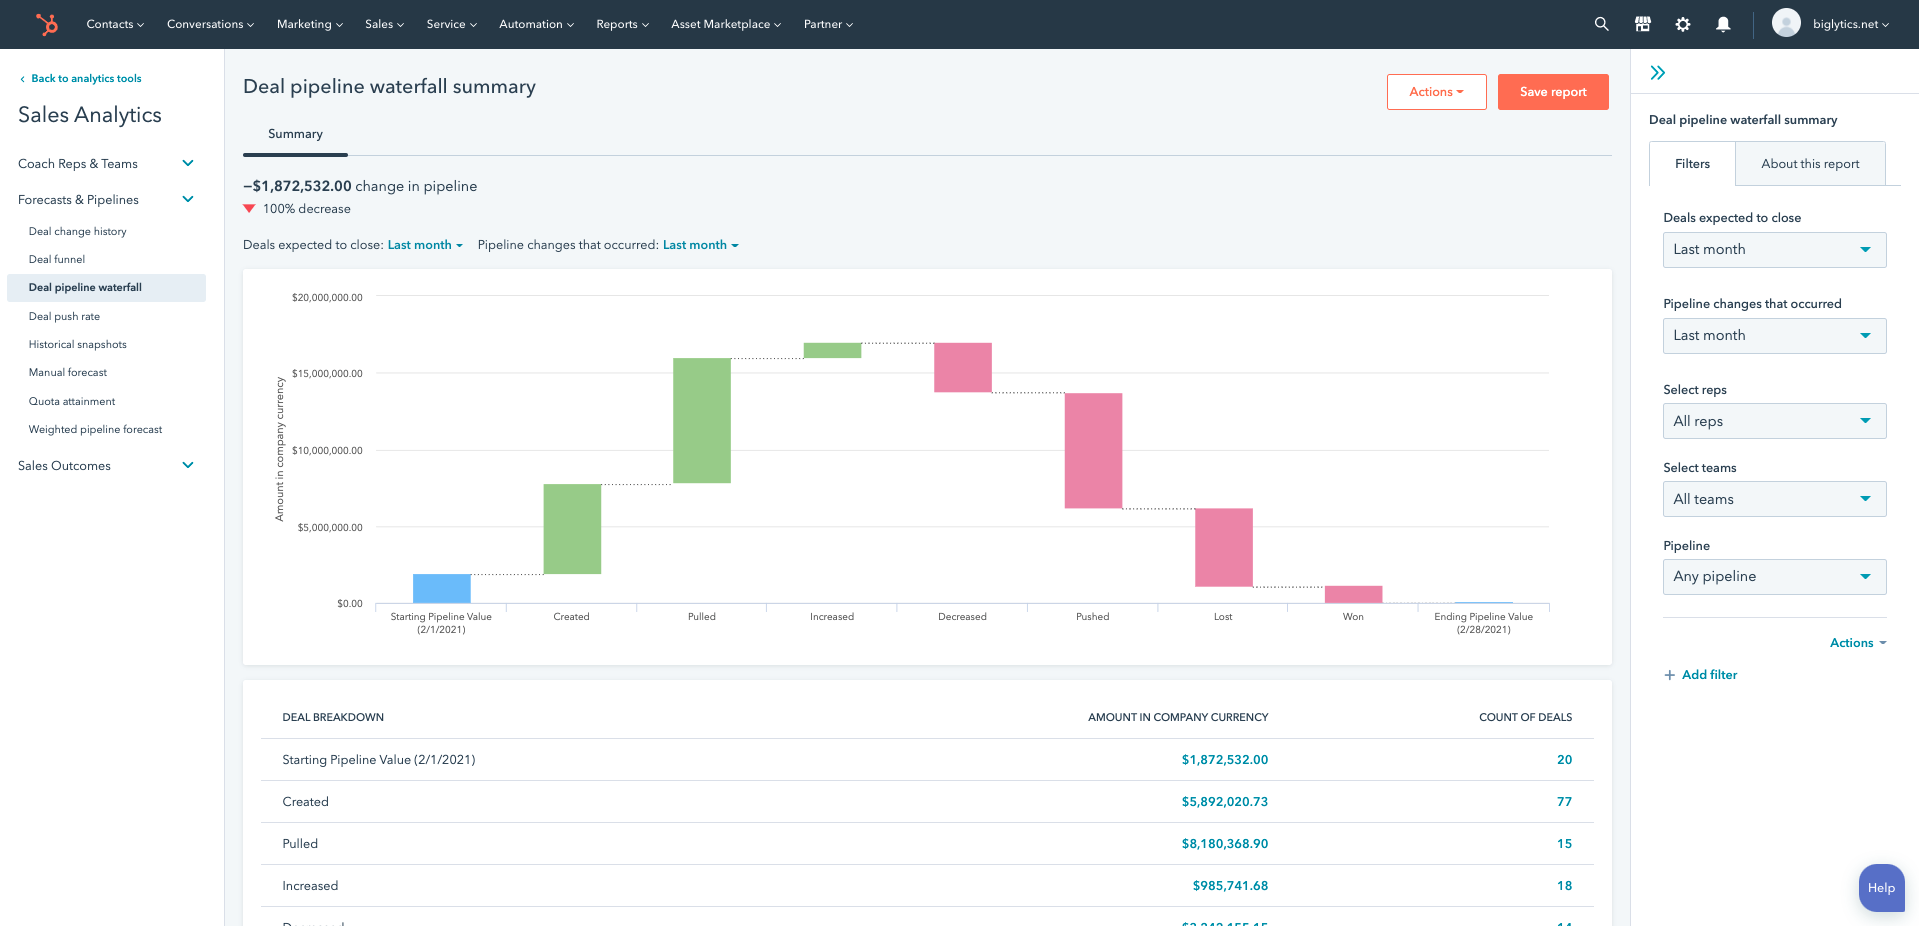 HubSpot sales reporting software interface showing deal pipeline analytics